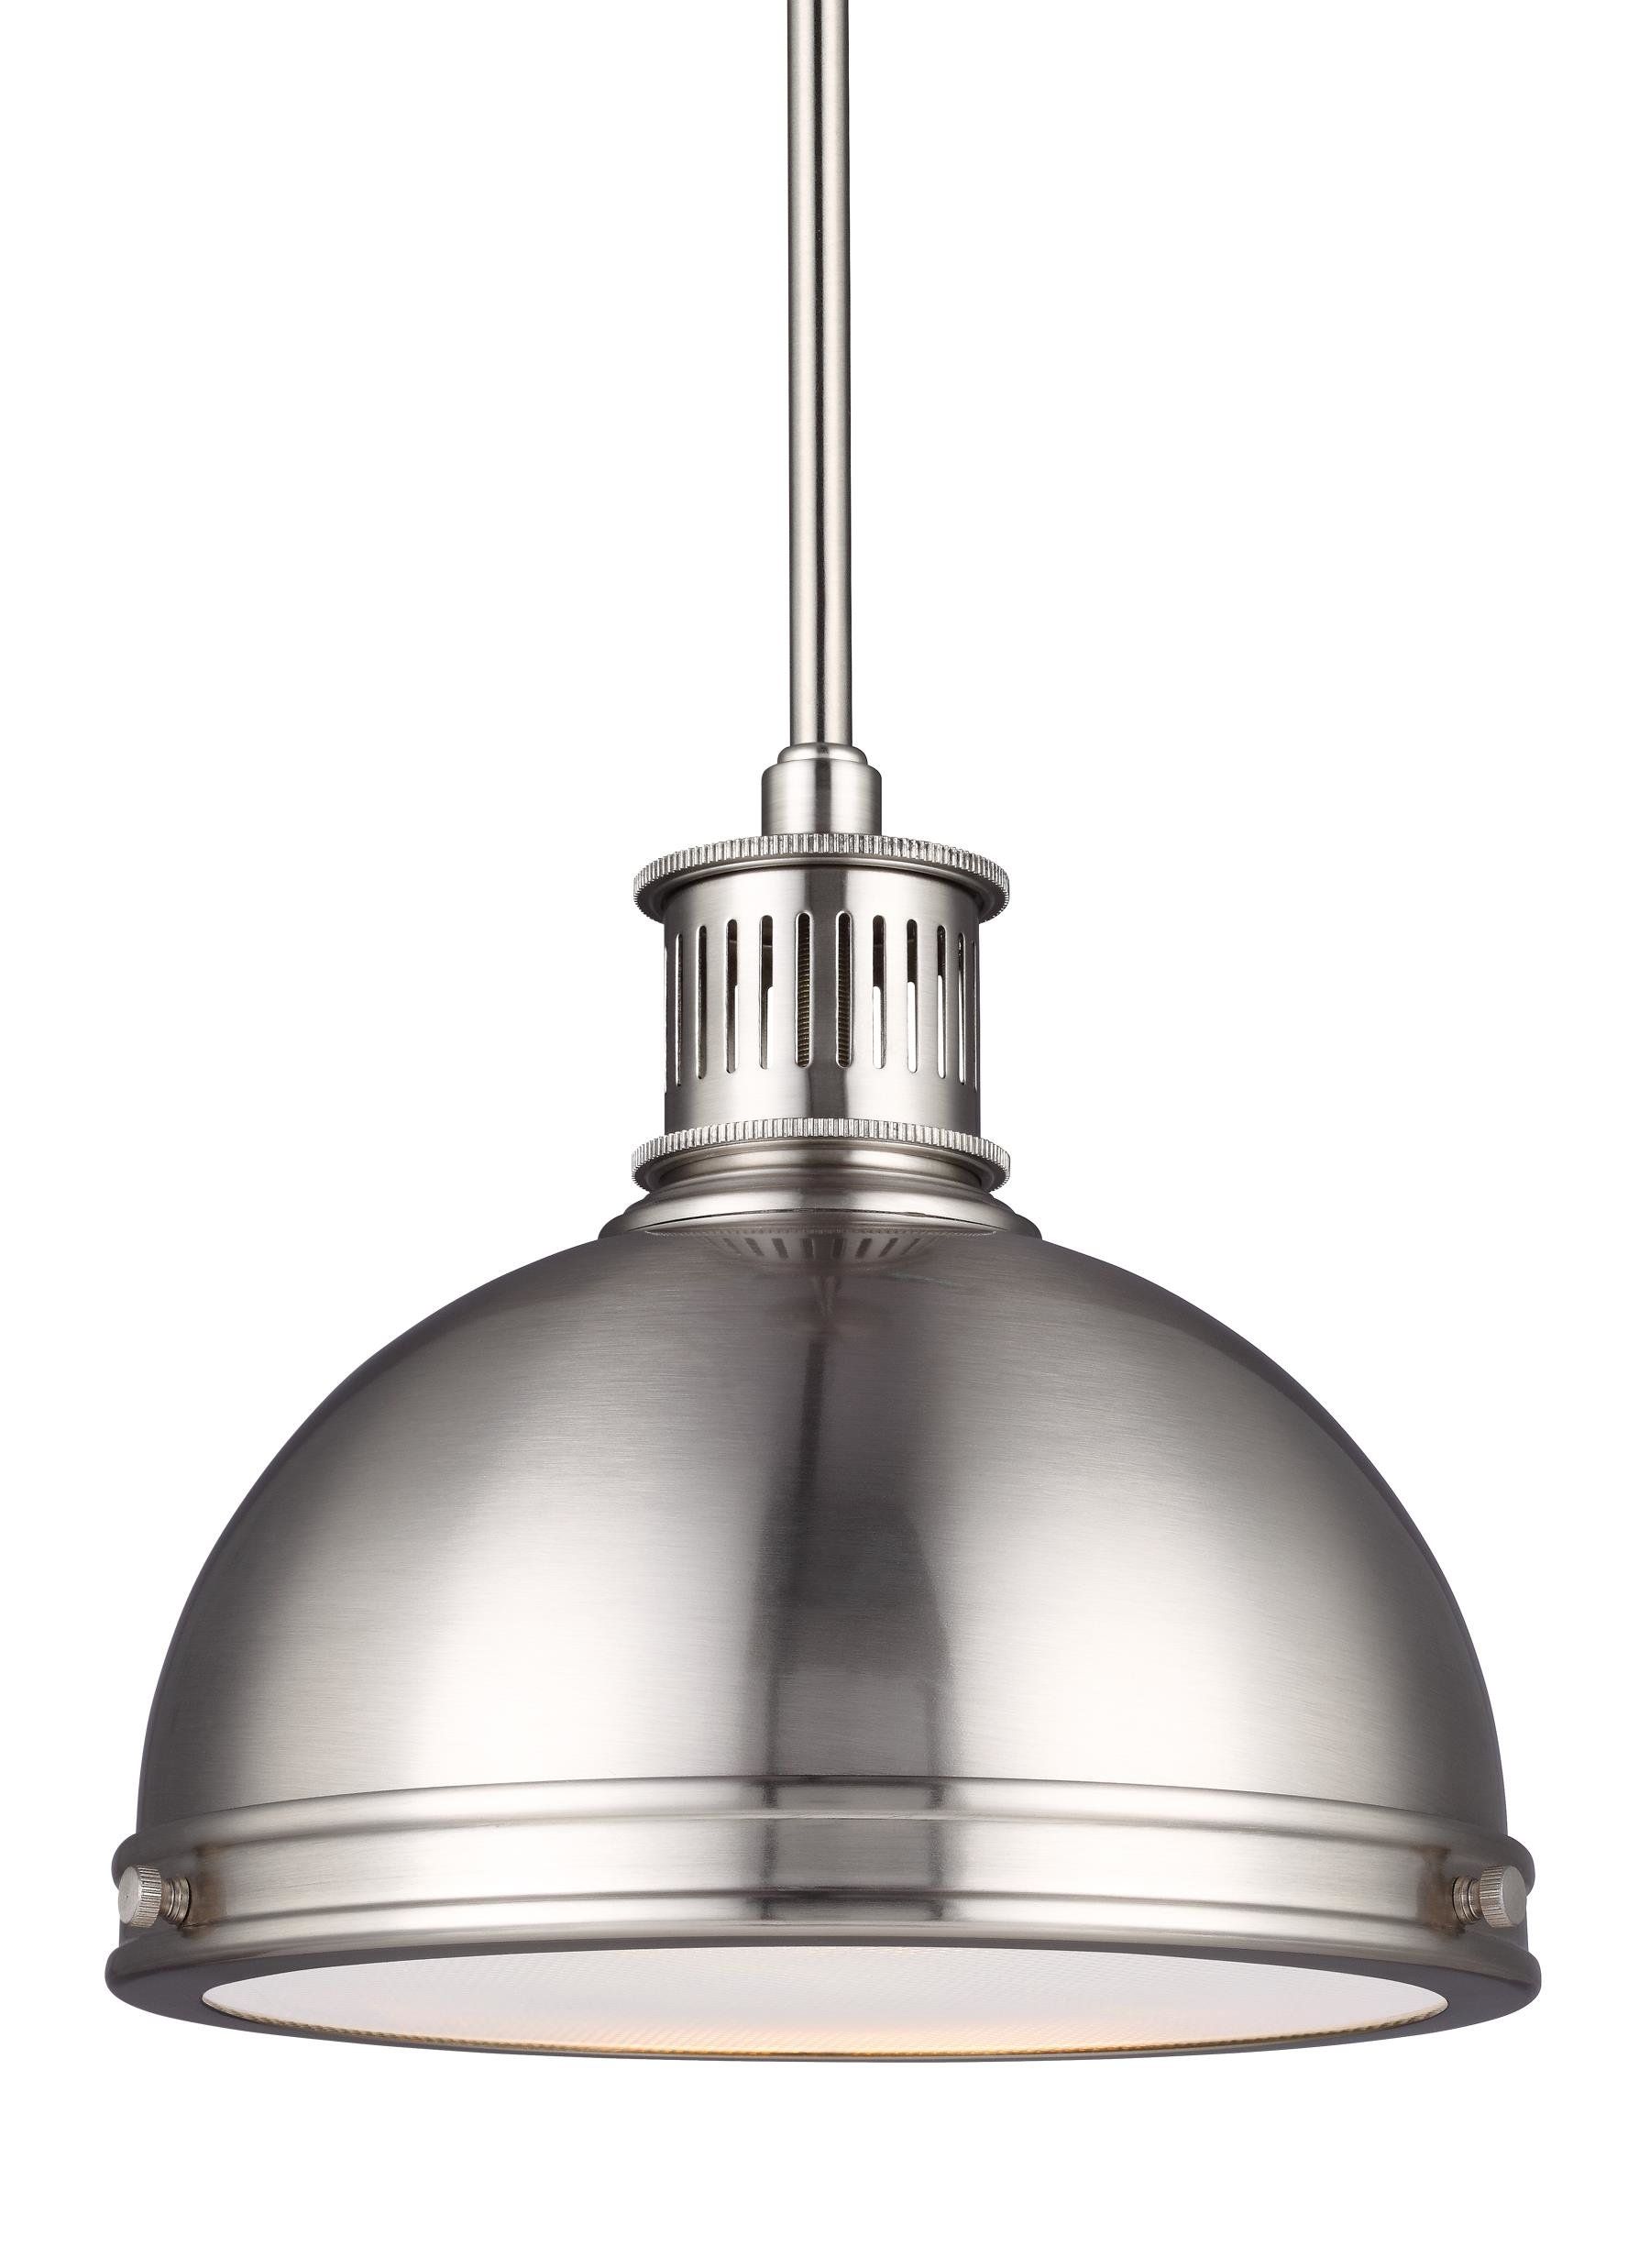 Orchard Hill 1 Light Led Dome Pendant Intended For Ninette 1 Light Dome Pendants (View 7 of 30)